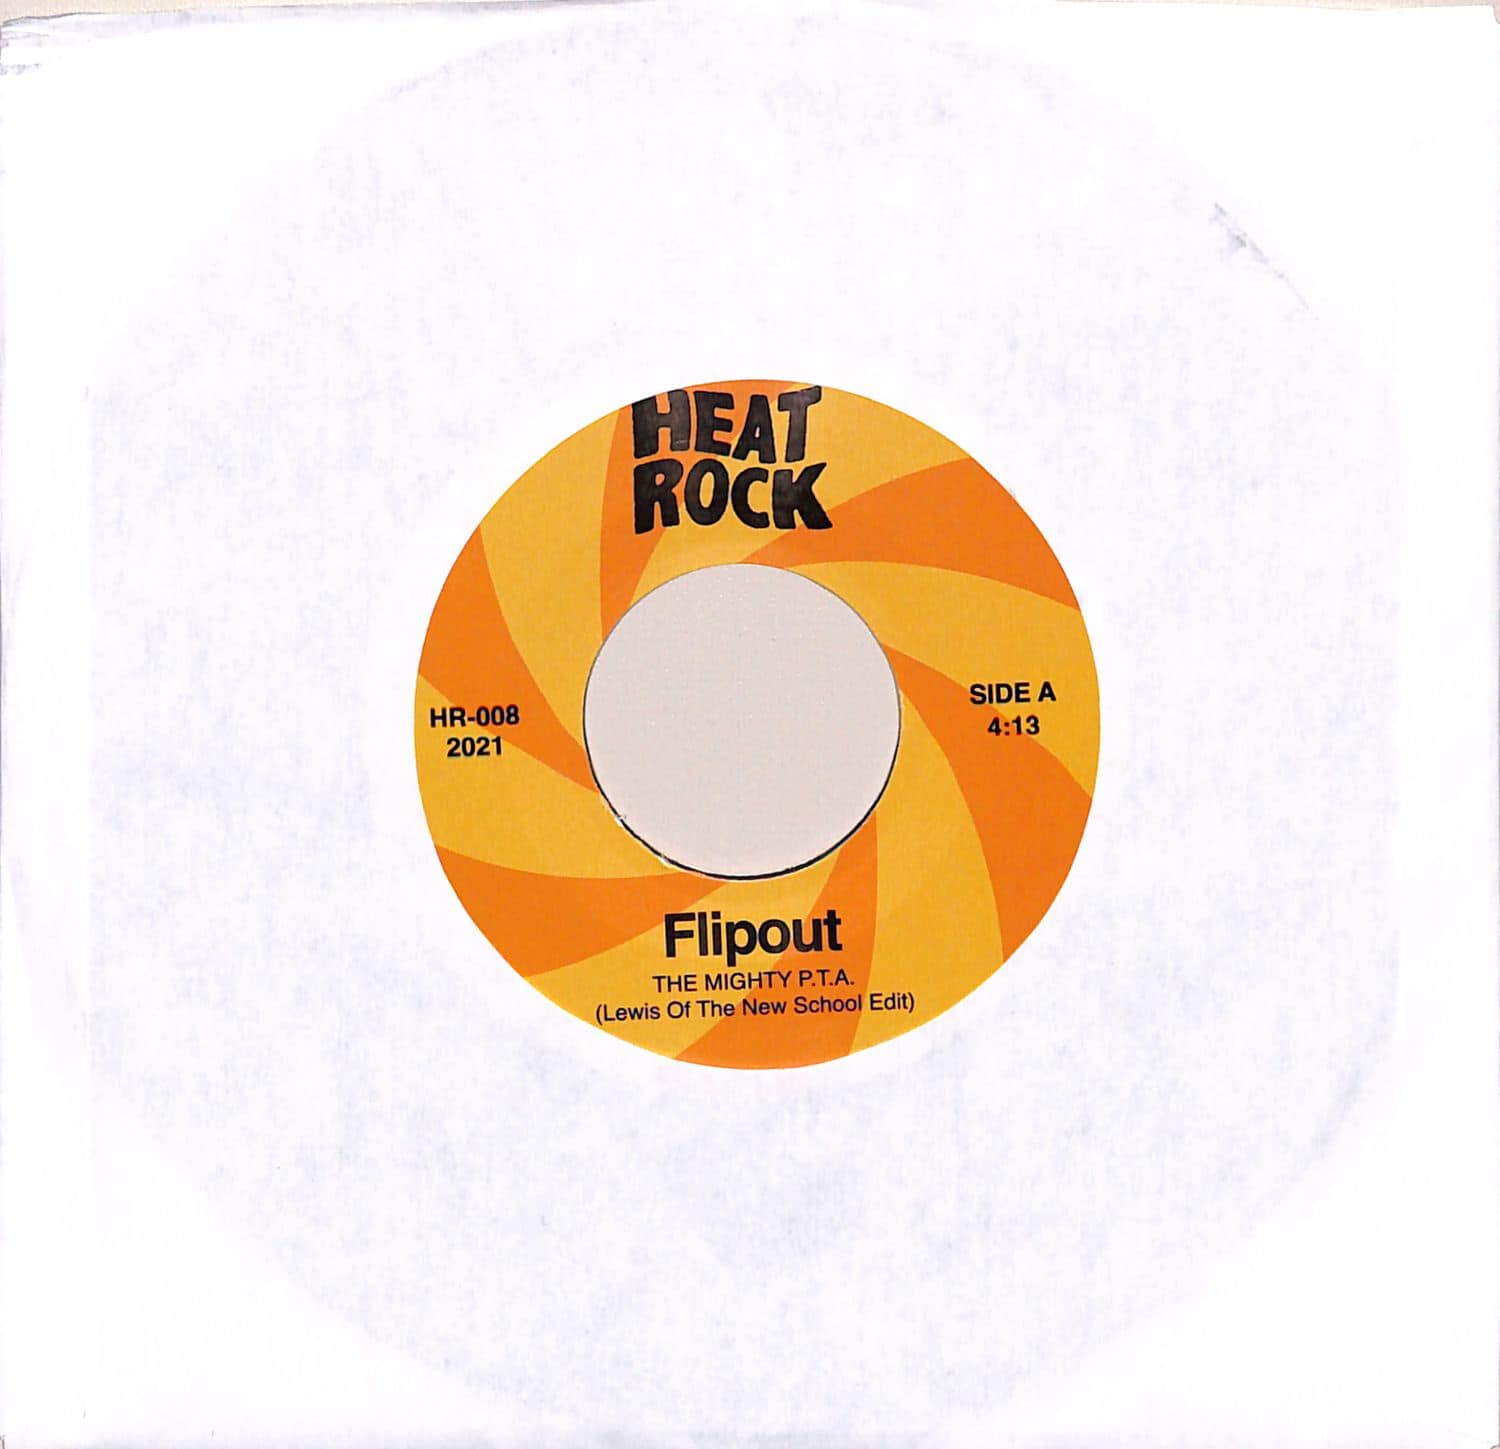 Flipout - THE MIGHTY P.T.A. 